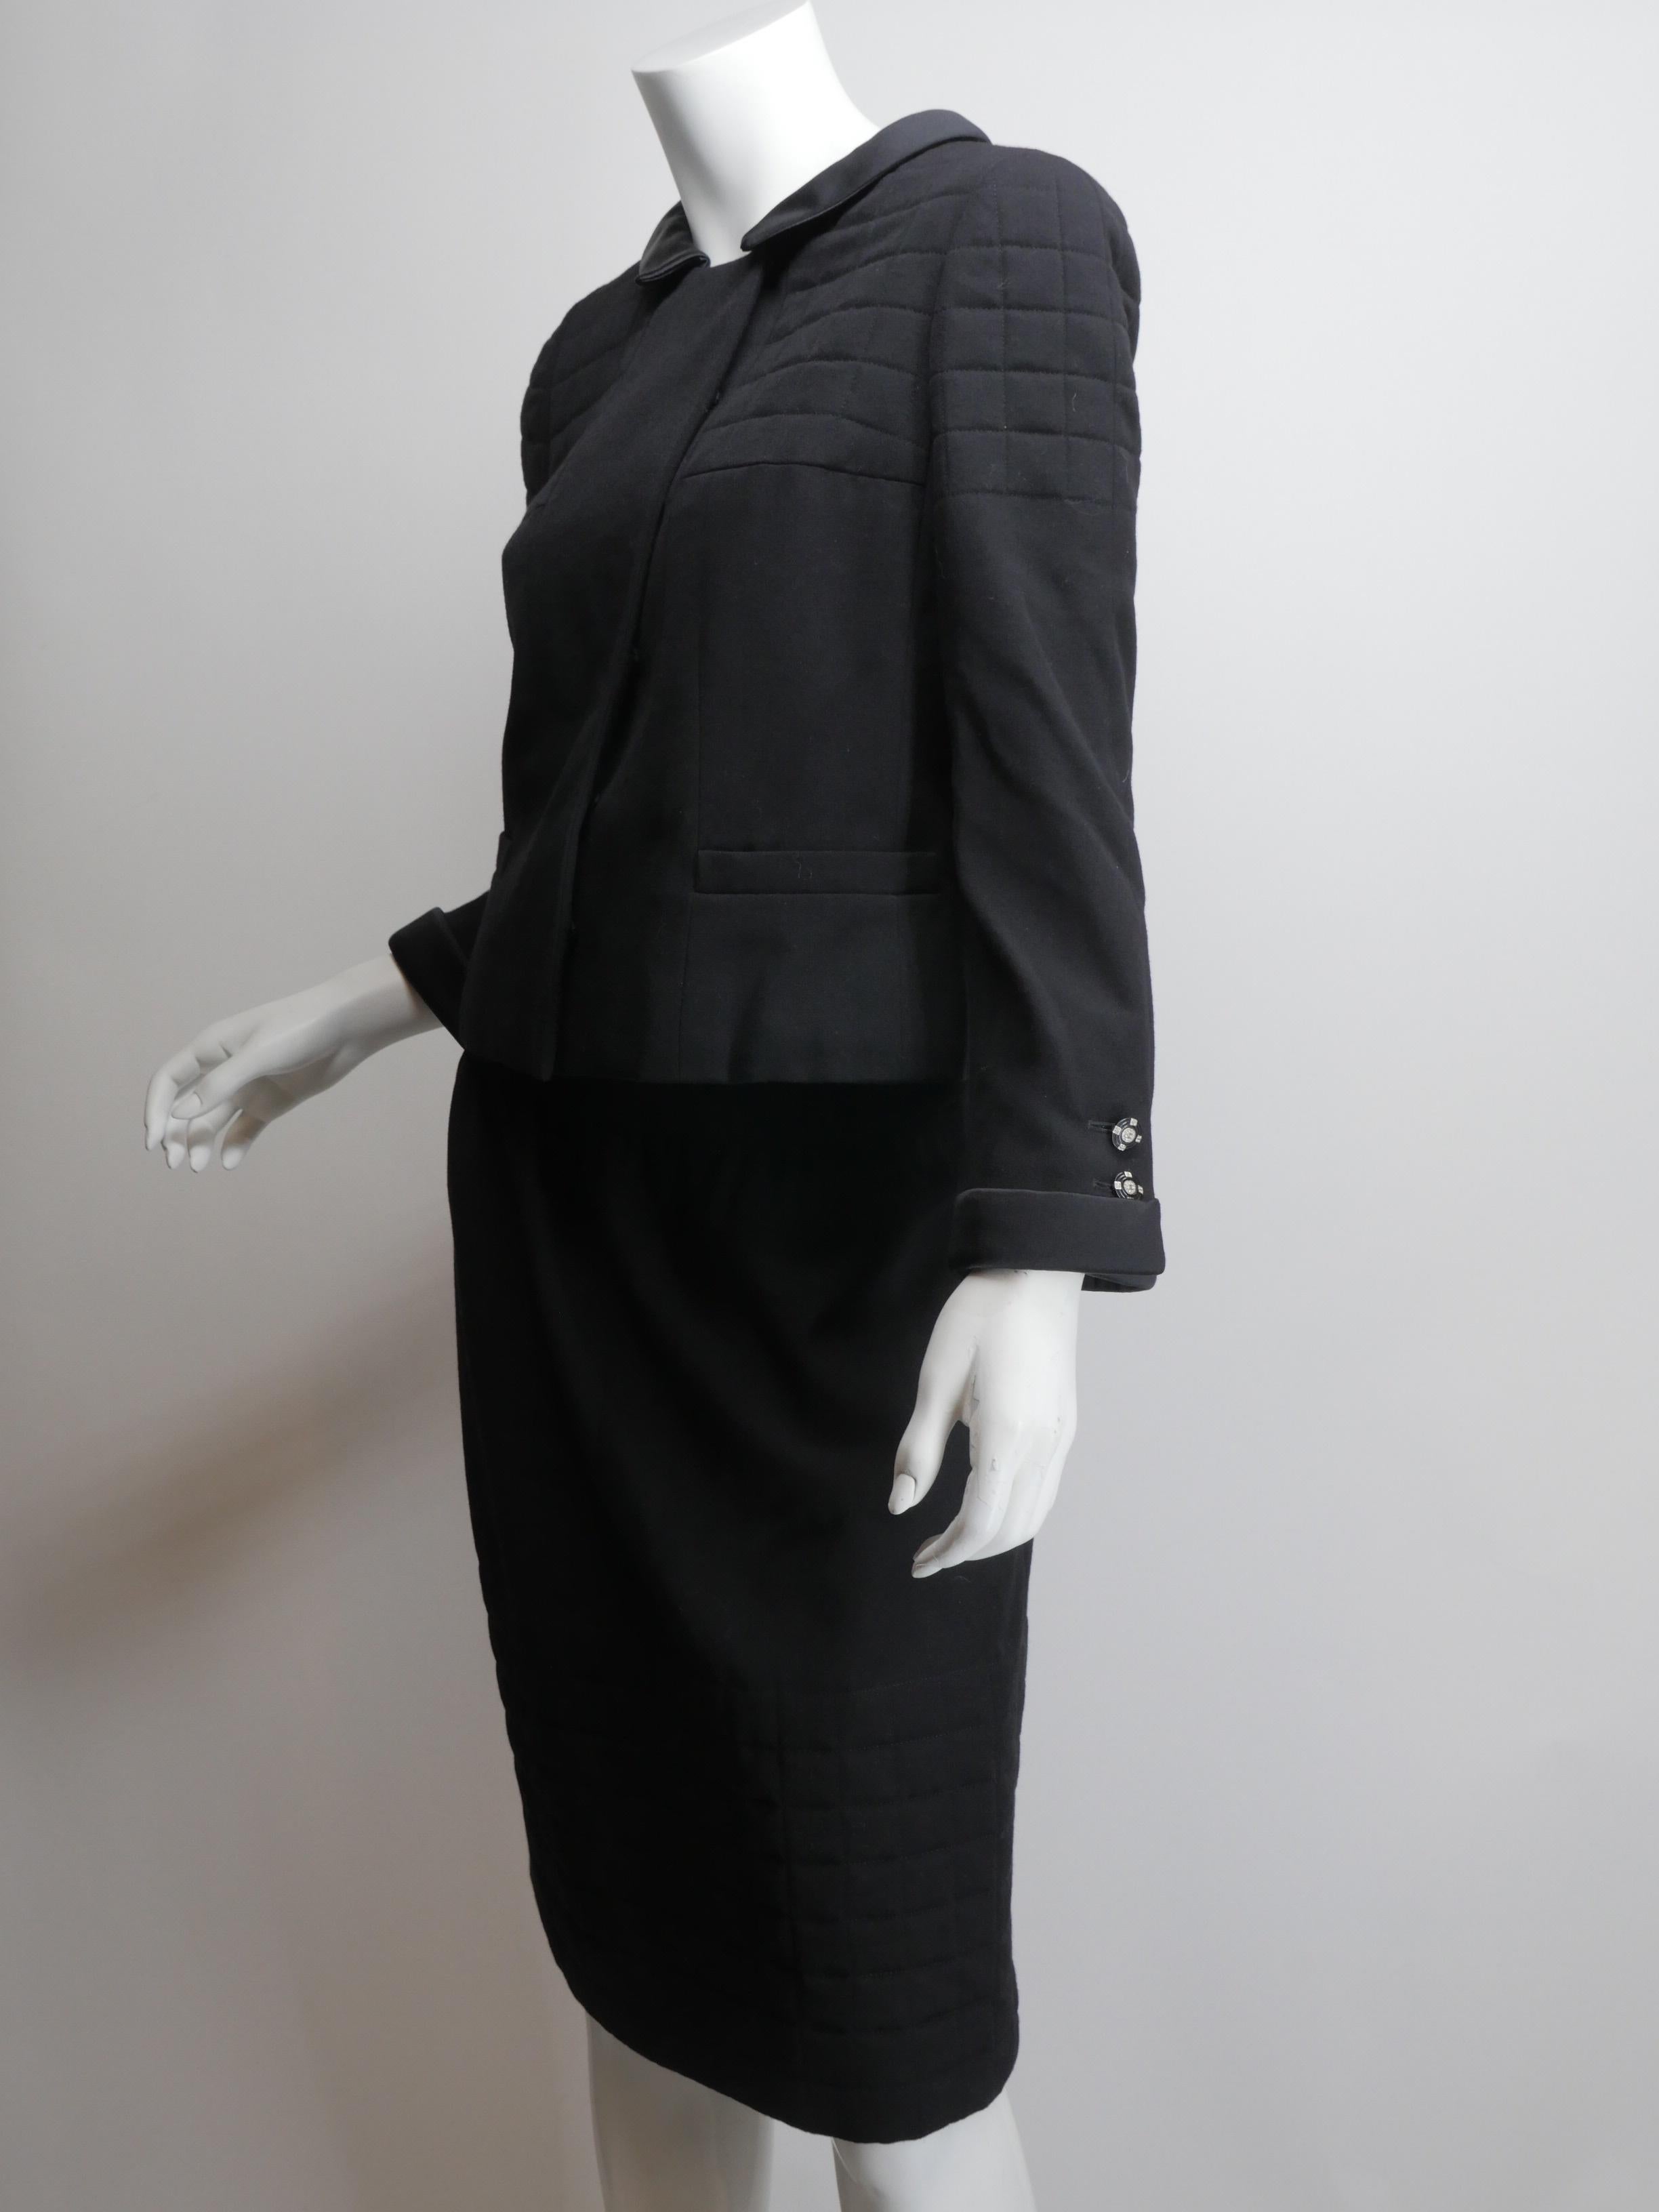 Chanel Skirt Suit. Black Jacket with Button Closure, Quilted Detail & Knee Length A-Line Skirt.